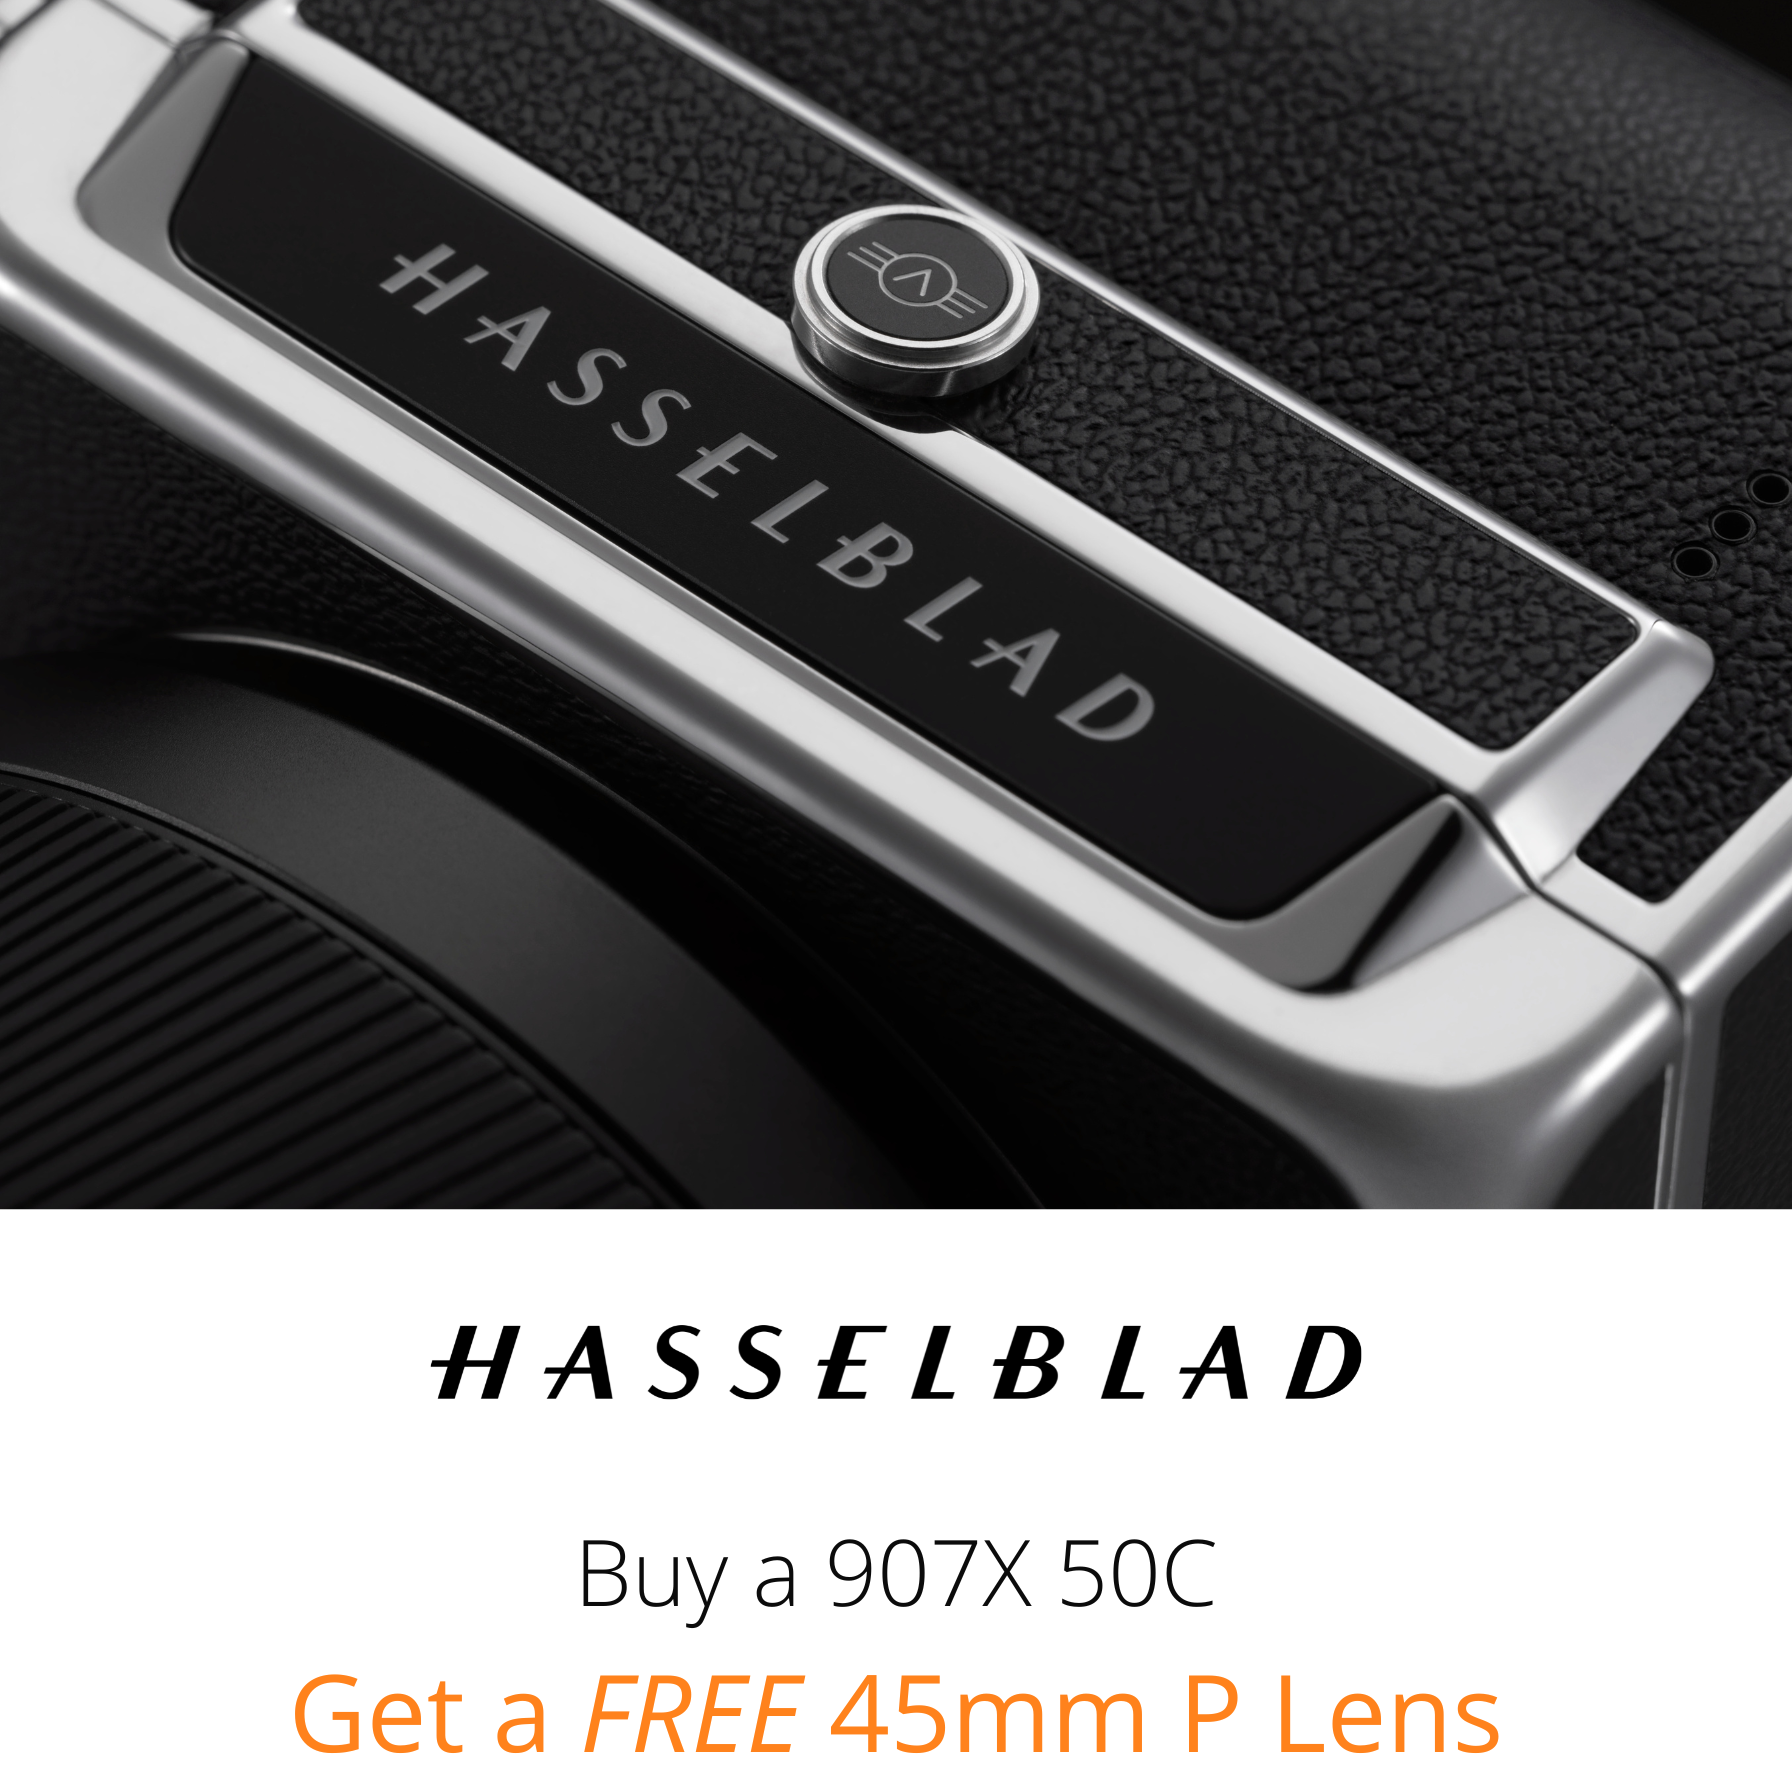 Hasselblad Buy a 907X 50C Get a FREE 45mm P Lens